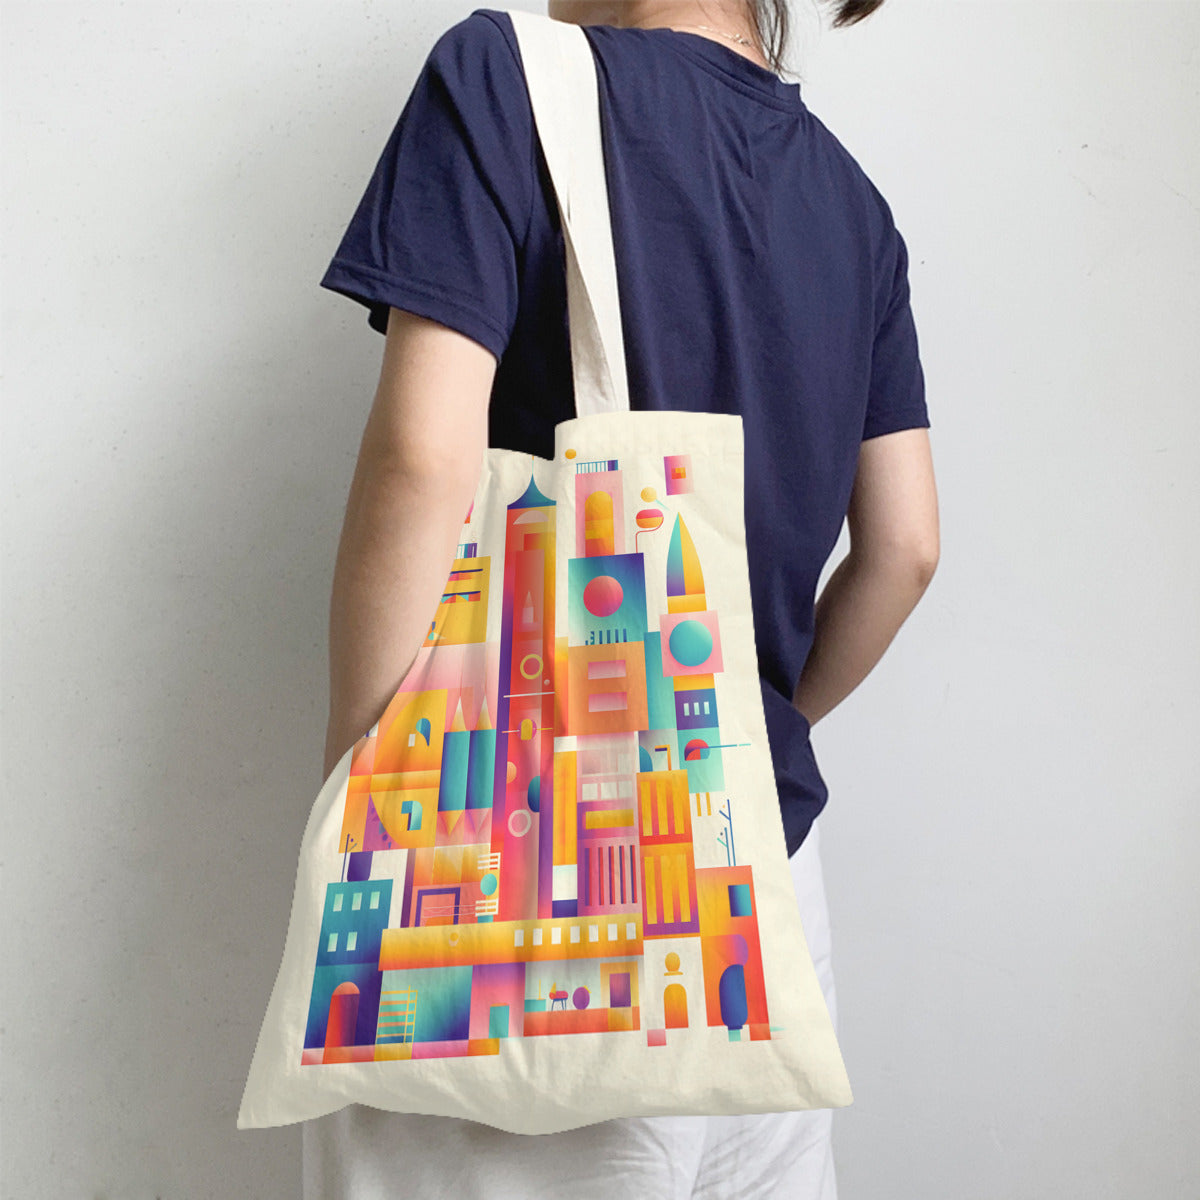 This printed cartoon castle canvas bag with large capacity can be used for shopping, travelling, working, studying and many other occasions.